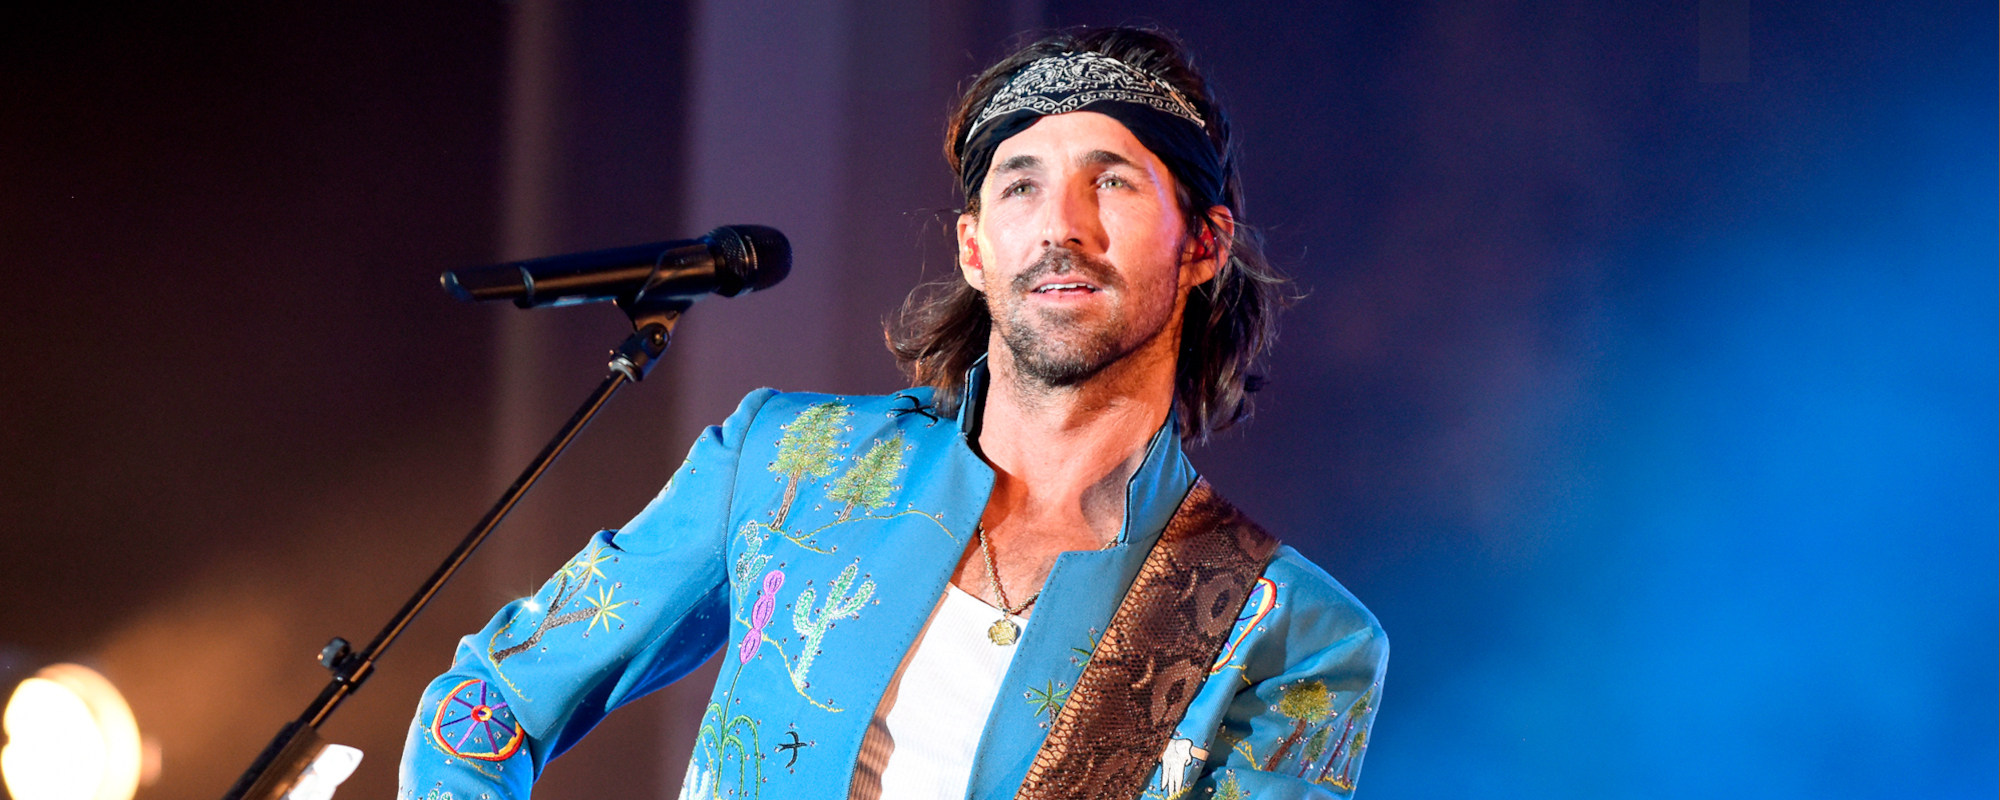 Jake Owen Releases Four New Songs Ahead of ‘Loose Cannon’ Album